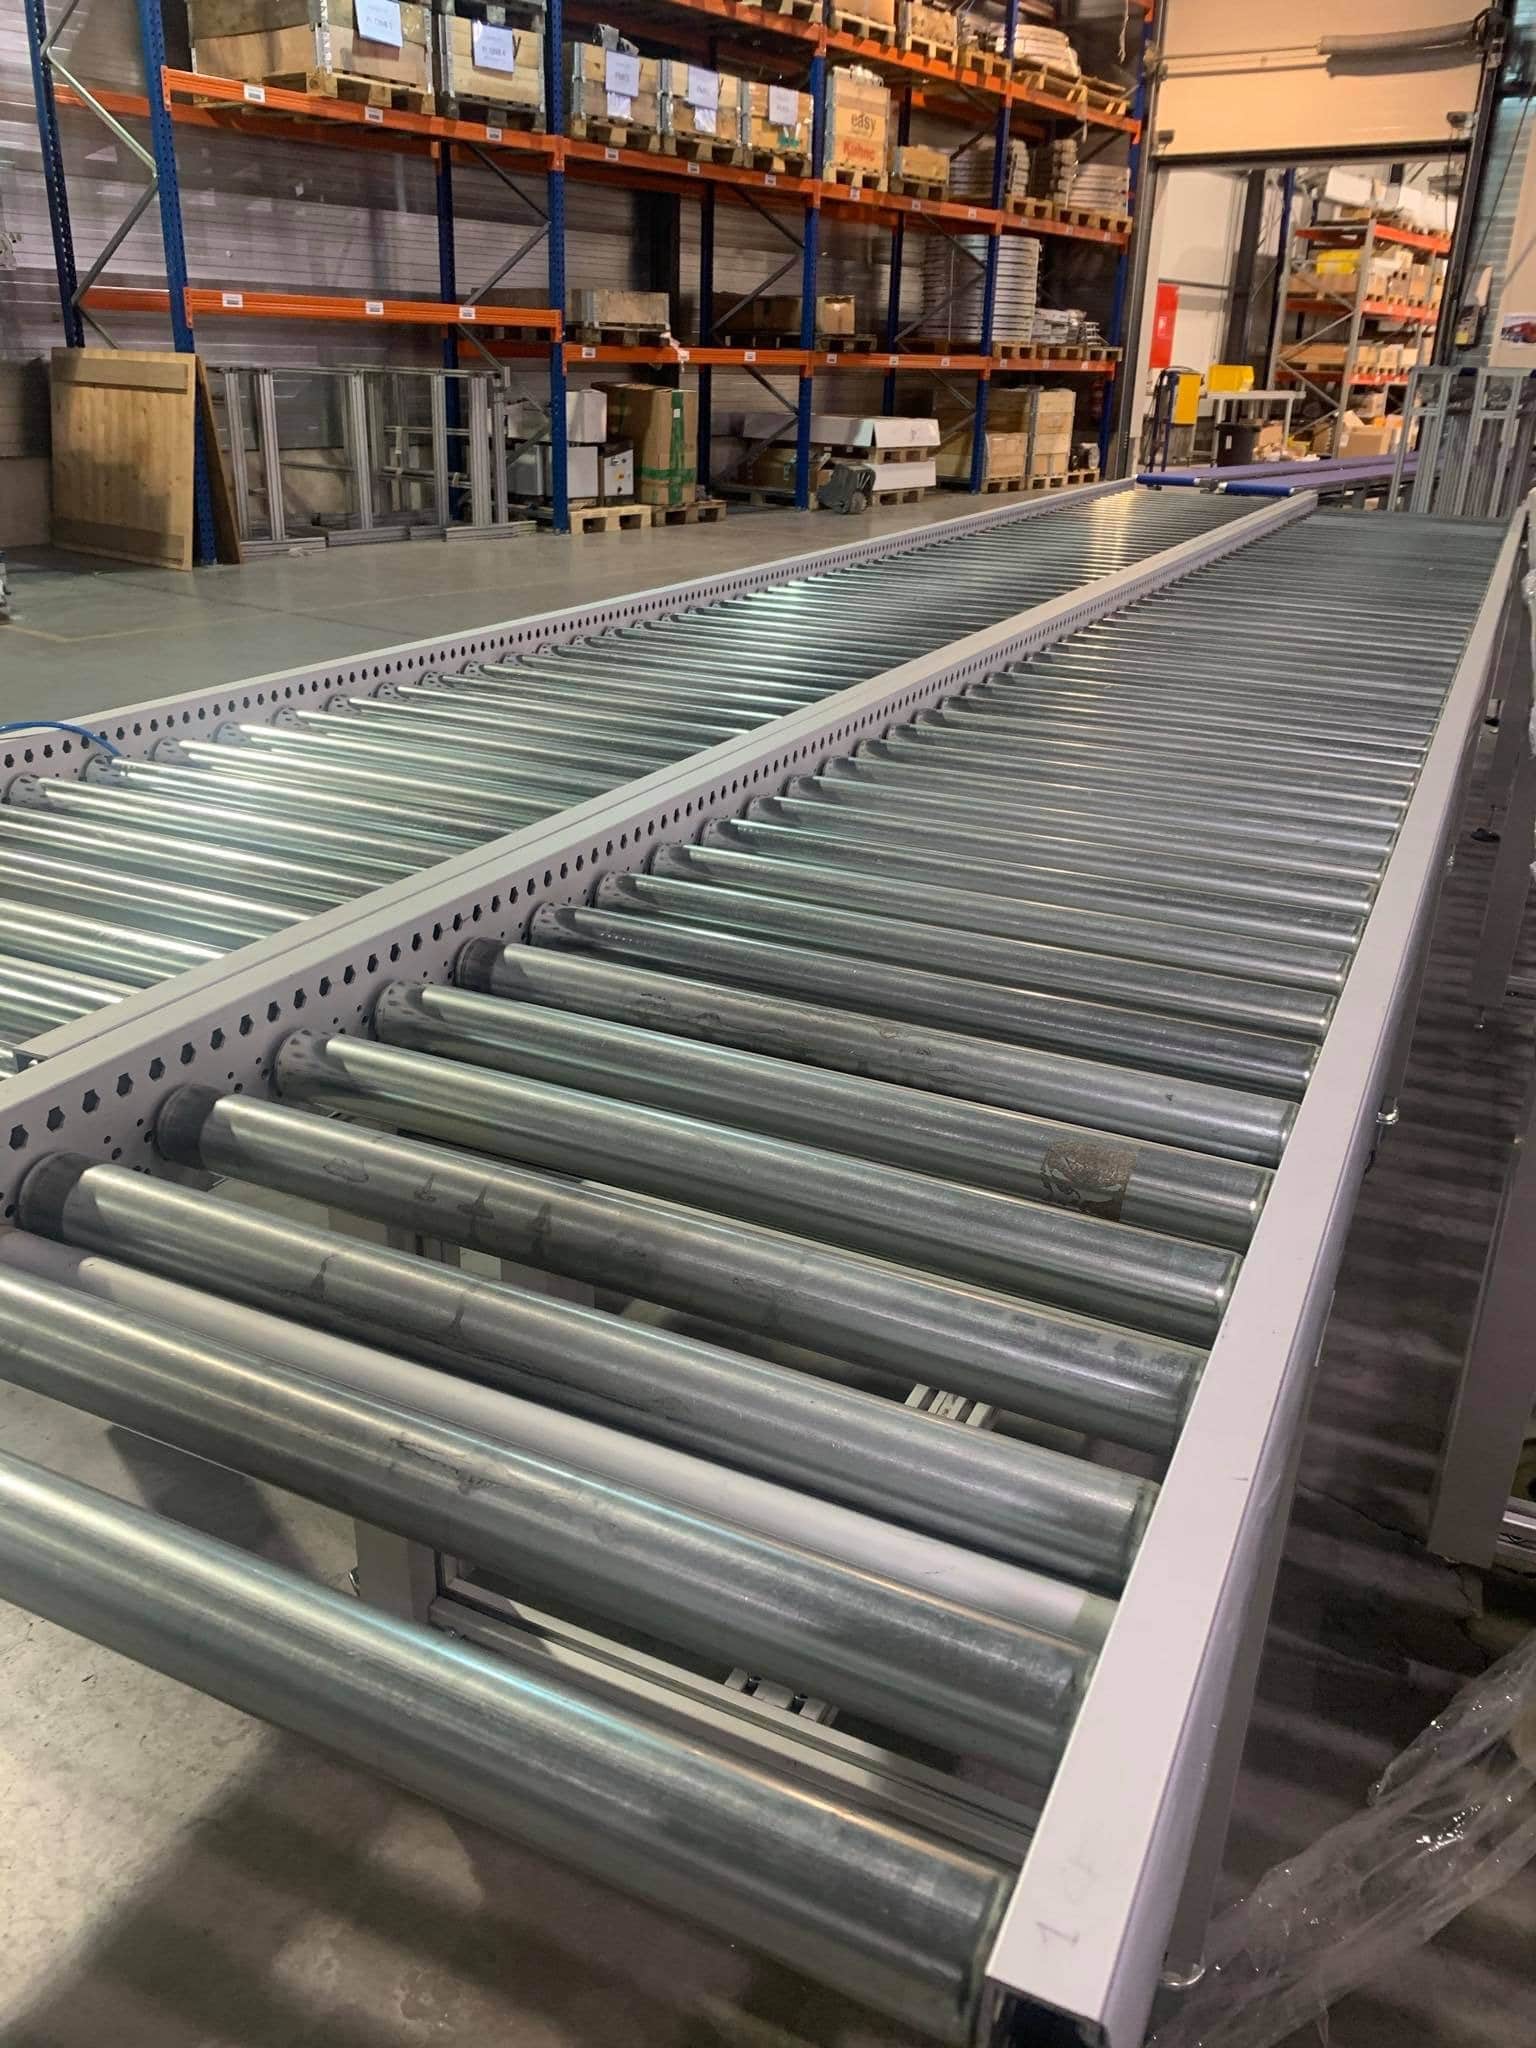 More detailed photo of our RCP roller conveyors. They are very sturdy and perfect for practically every industry.